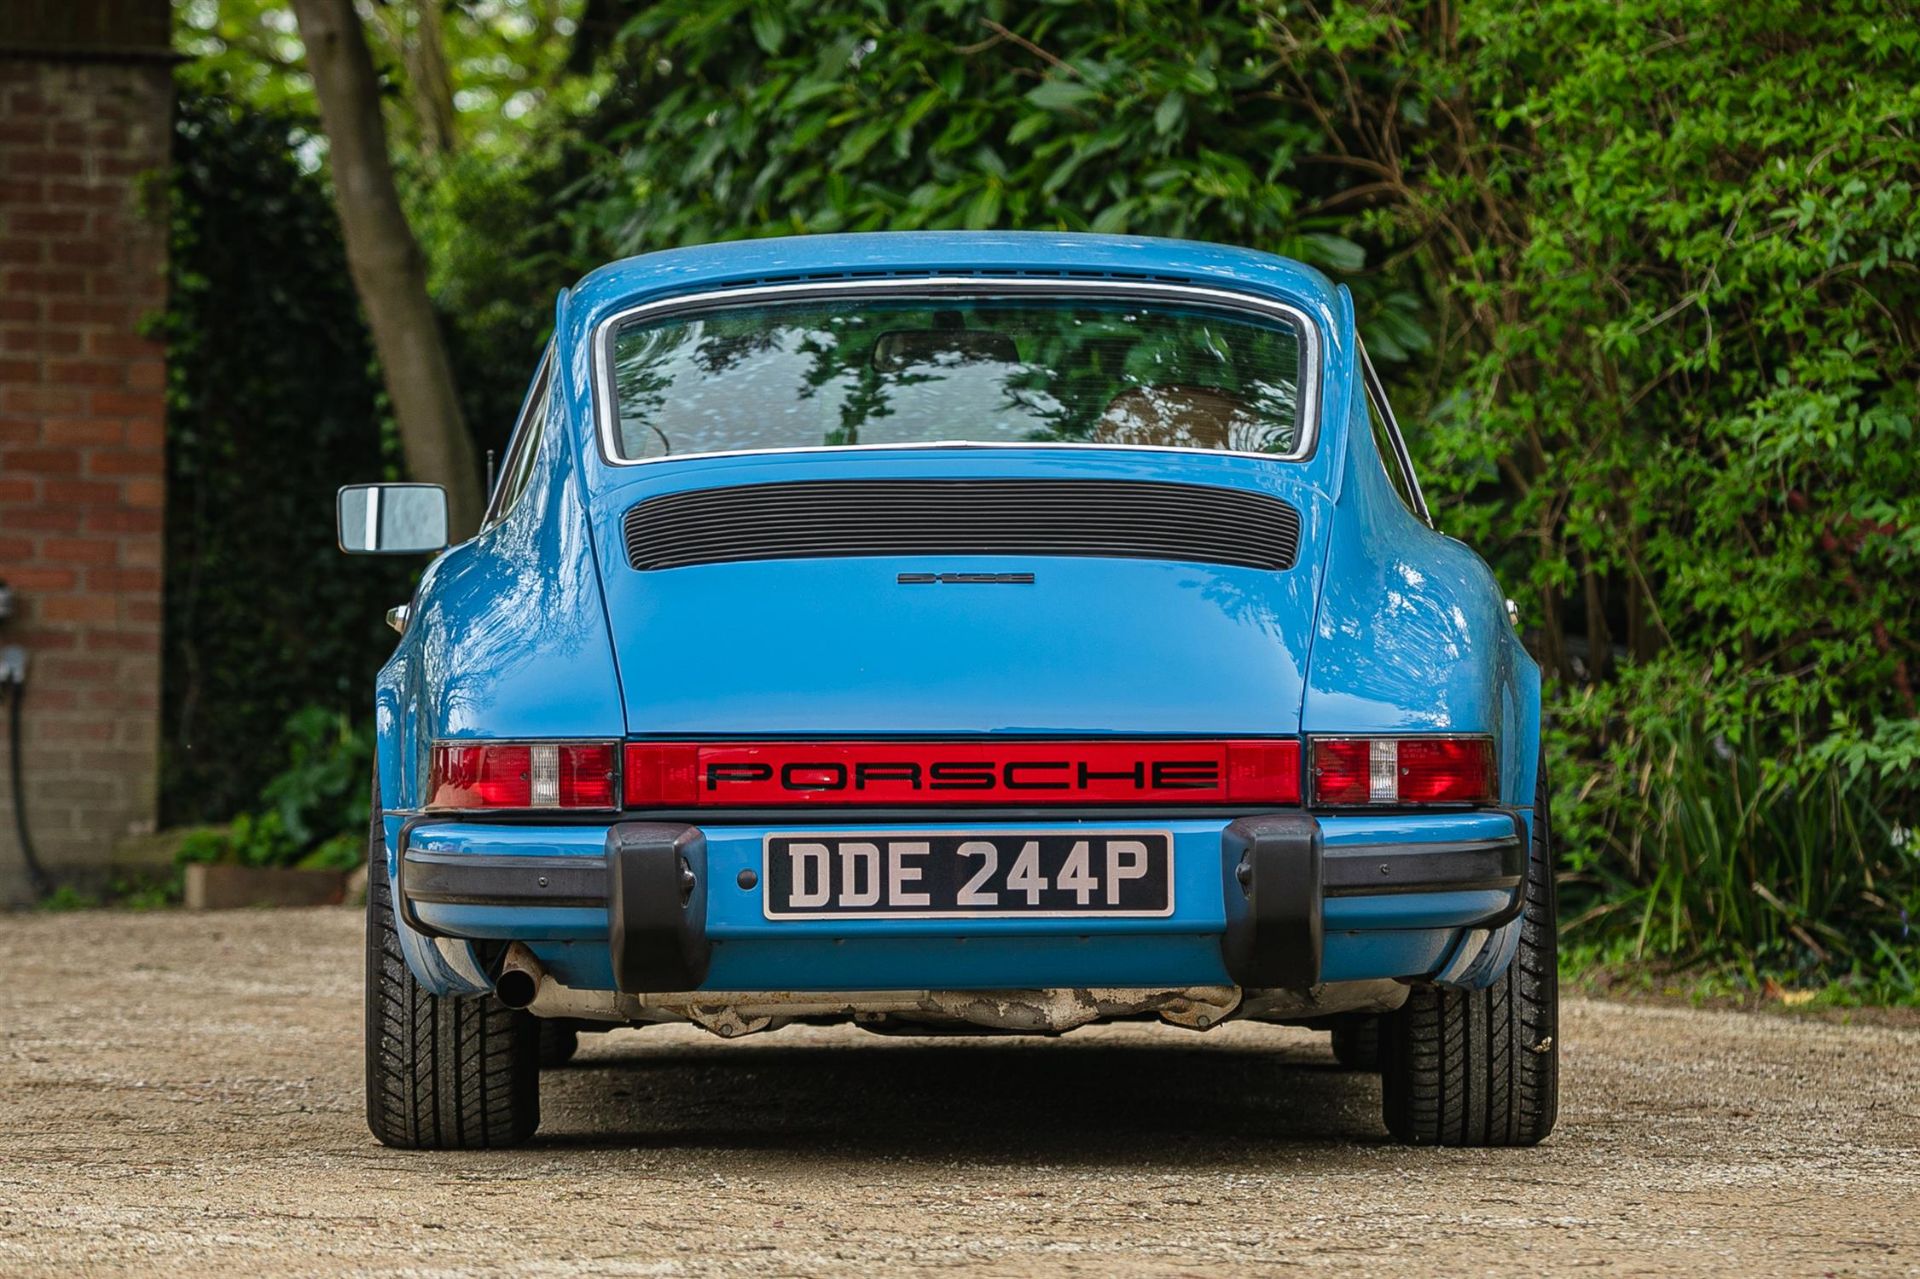 **Sold Pre-Sale**1976 Porsche 912E - Offered Directly From Mike Brewer - Image 7 of 10